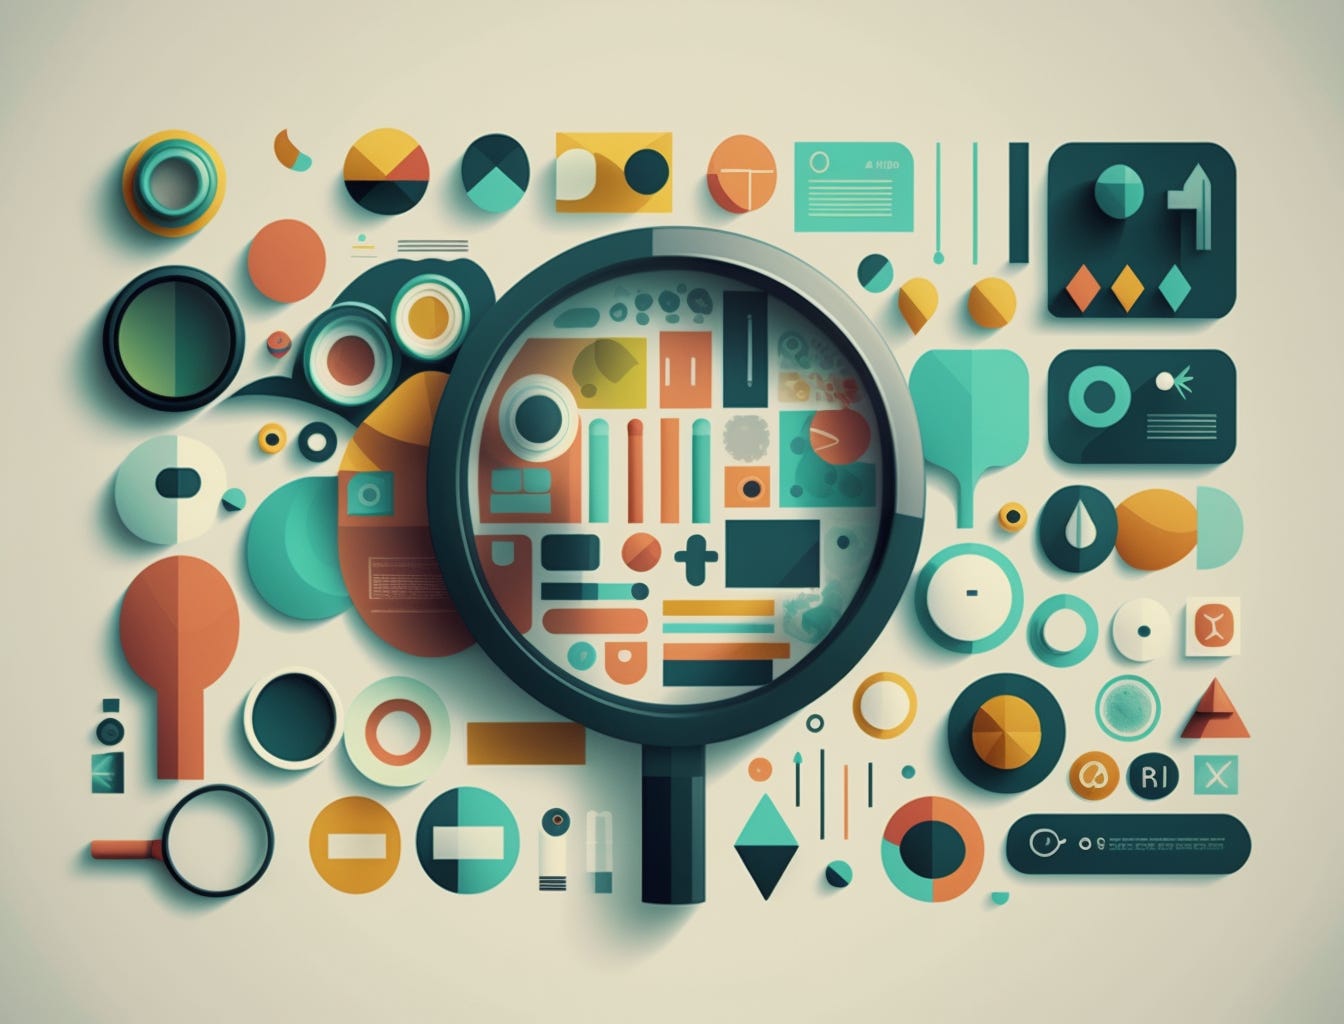 Illustration of a large magnifying glass looking at various UI components for the web. By John Wayne Hill